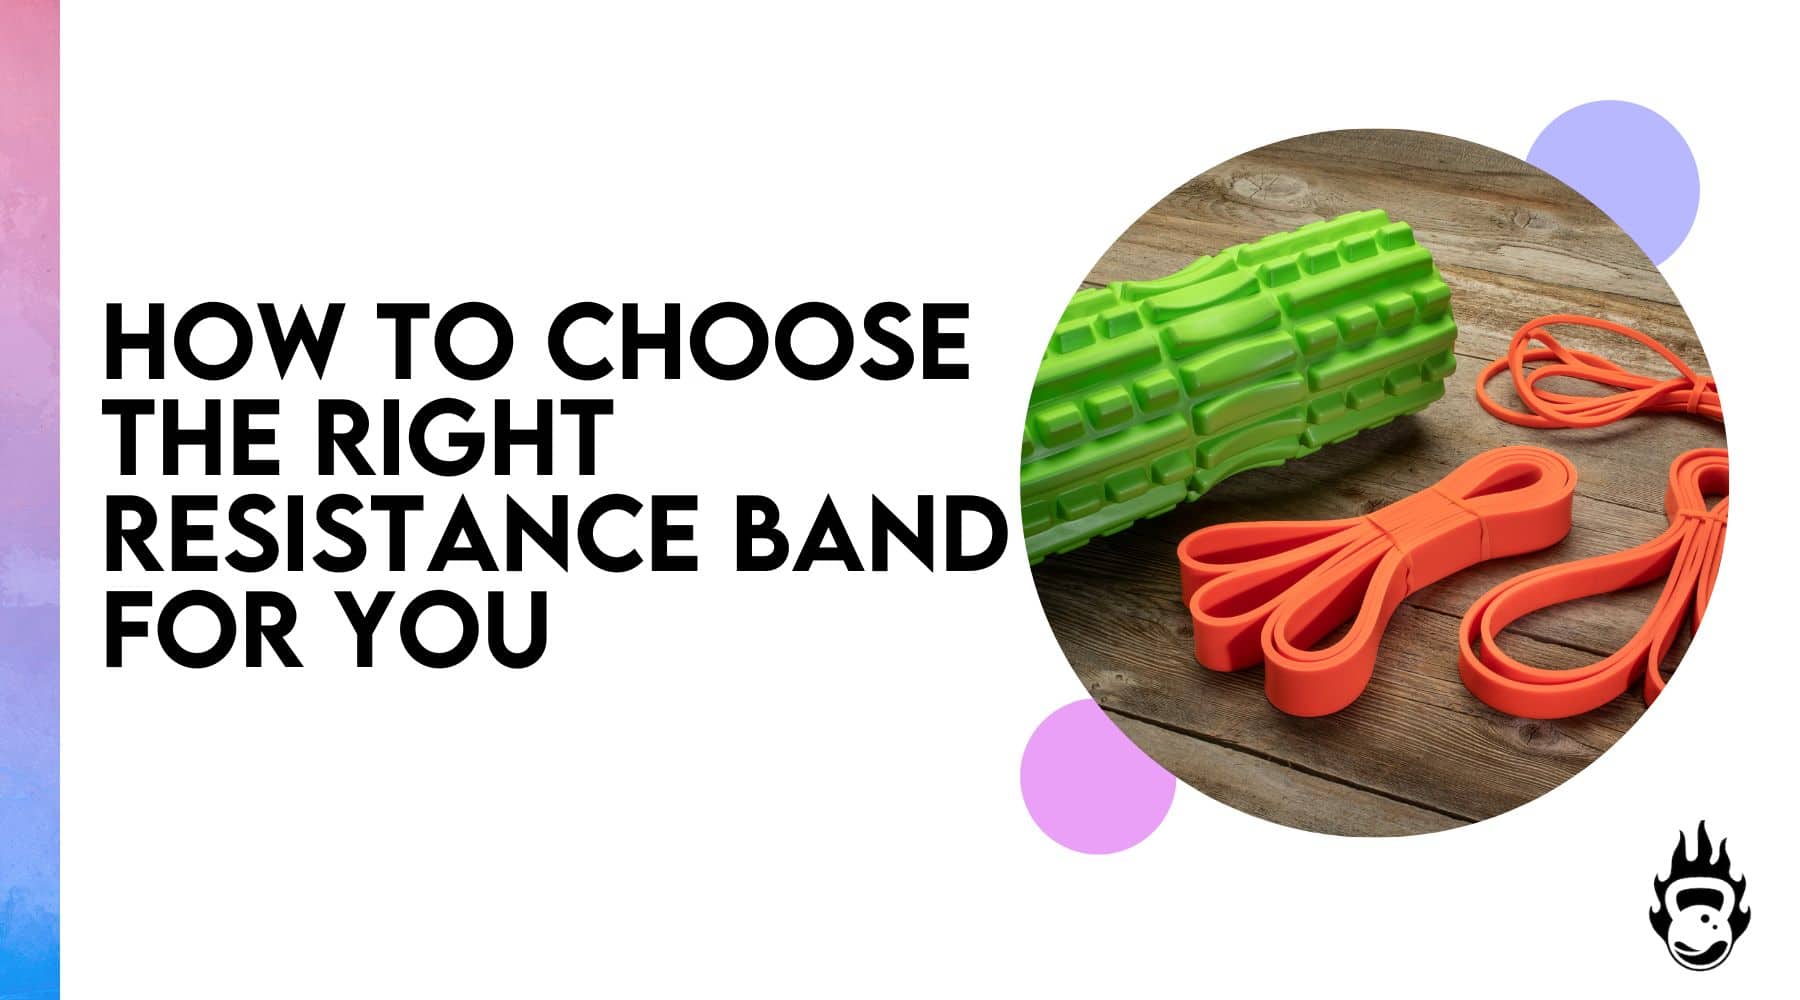 Are You Choosing the Right Cut Resistance?